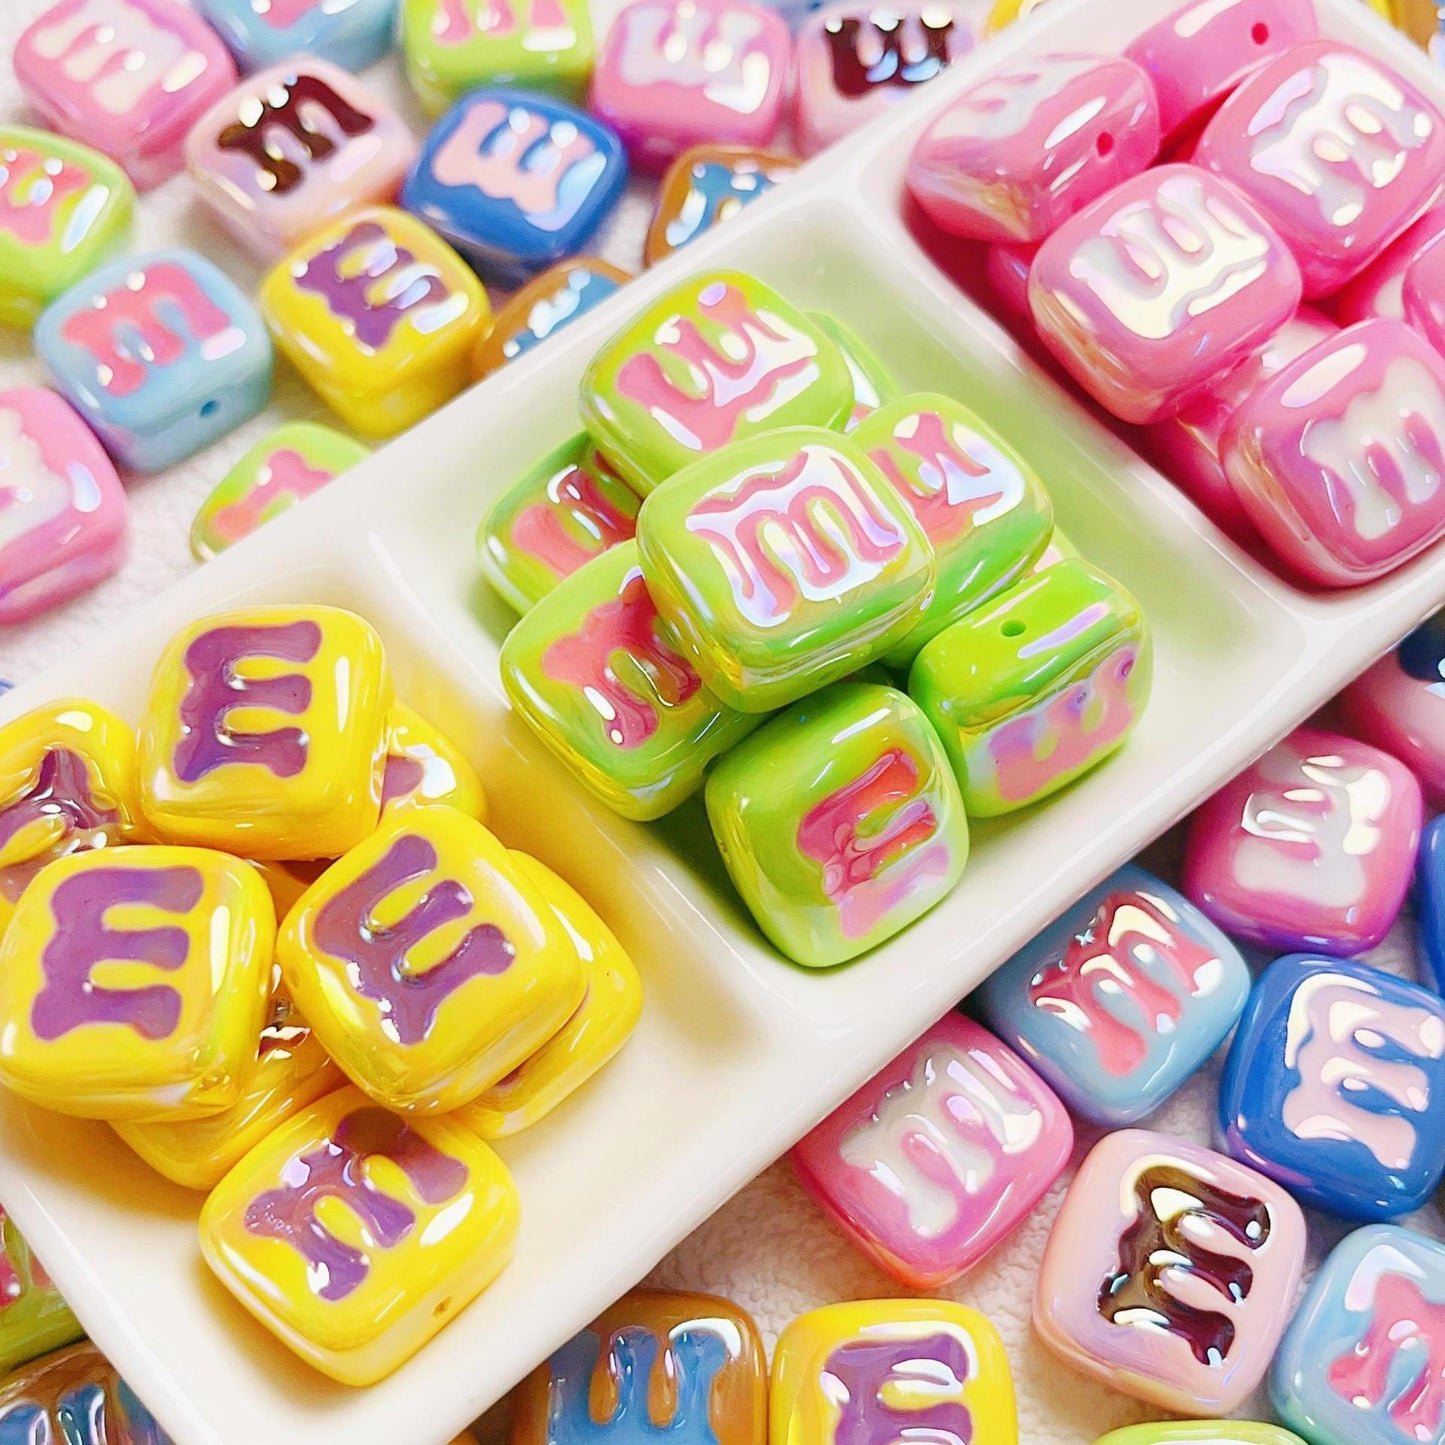 30 Pieces M letter Square Beads